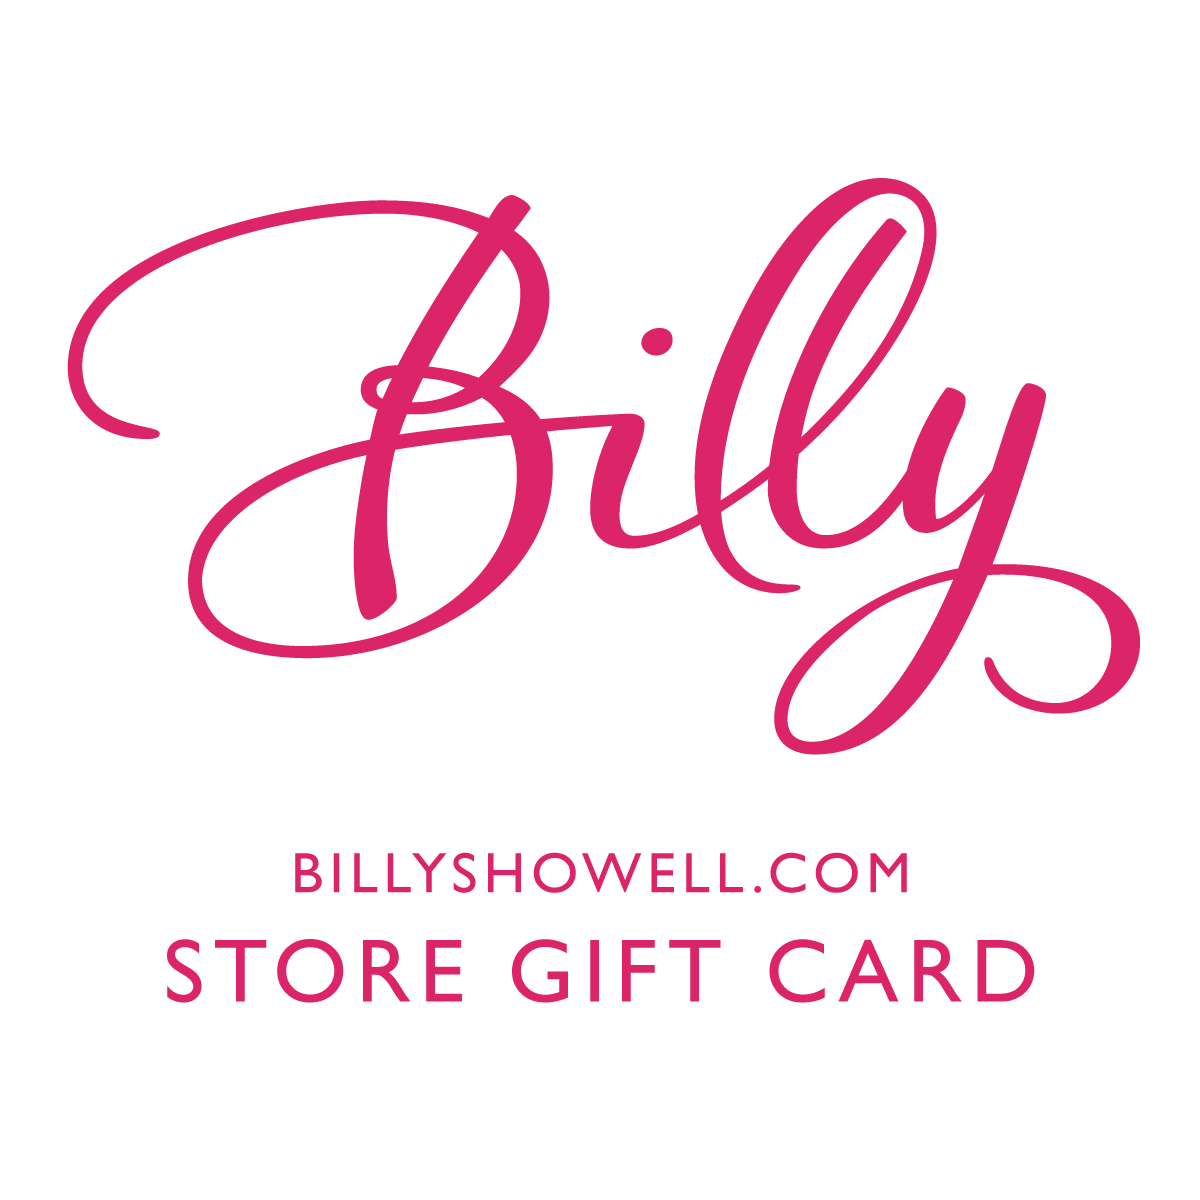 Billy Showell Store Gift Card